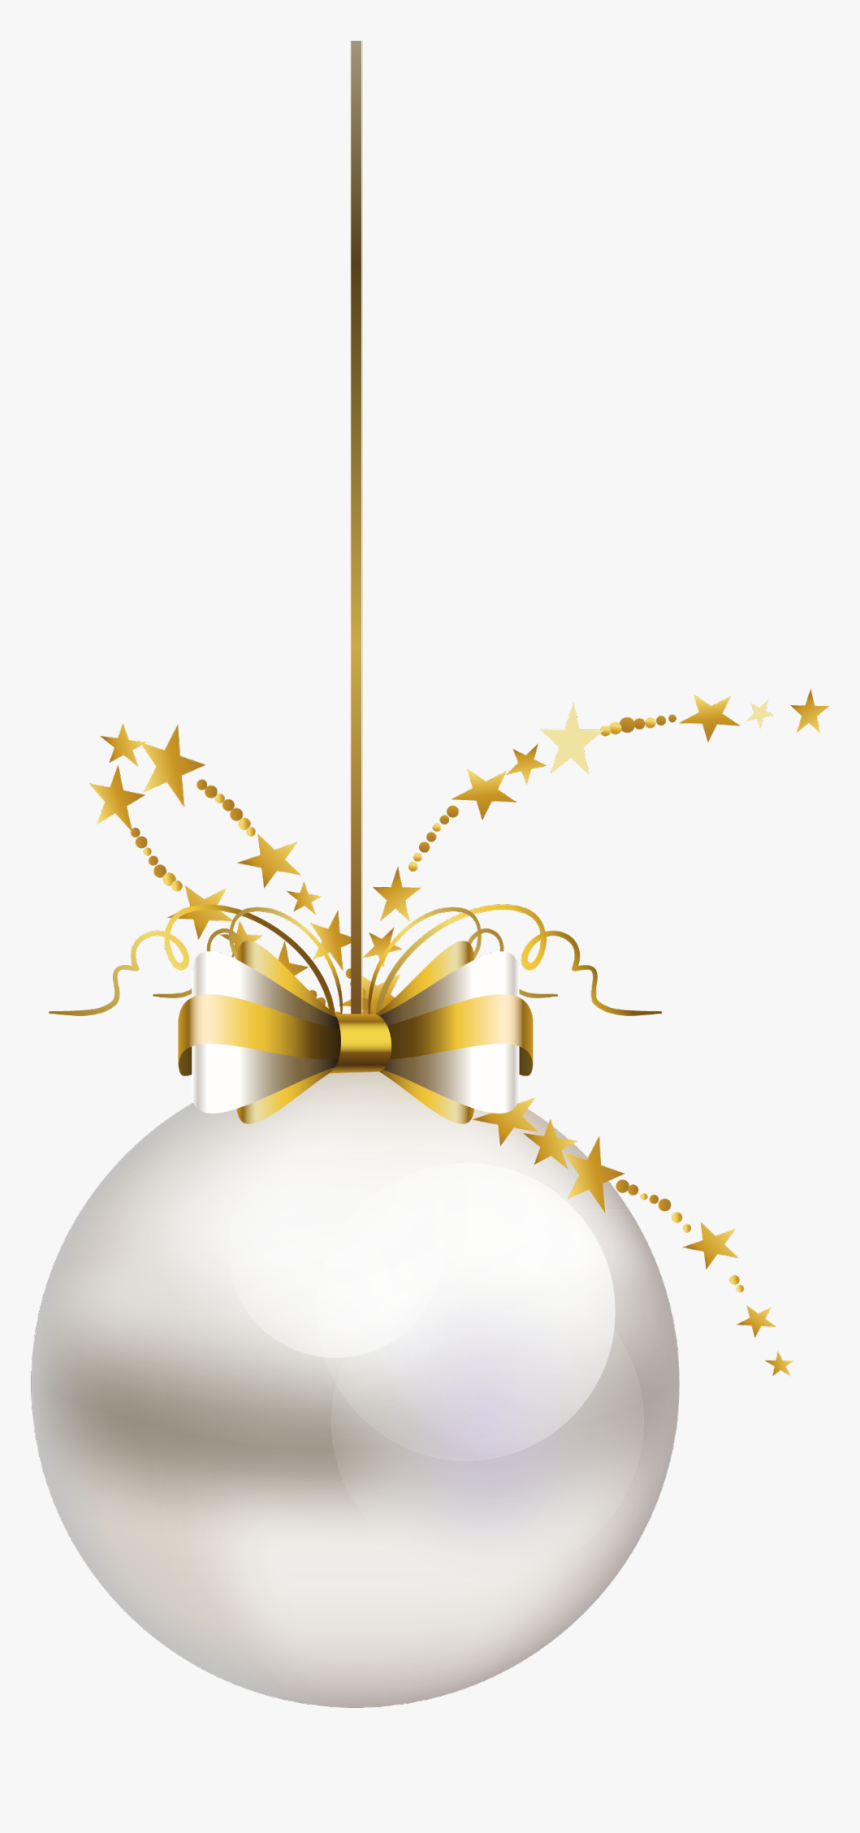 Silver Christmas Balls Png - Transparent Christmas Ball Png, Png Download, Free Download